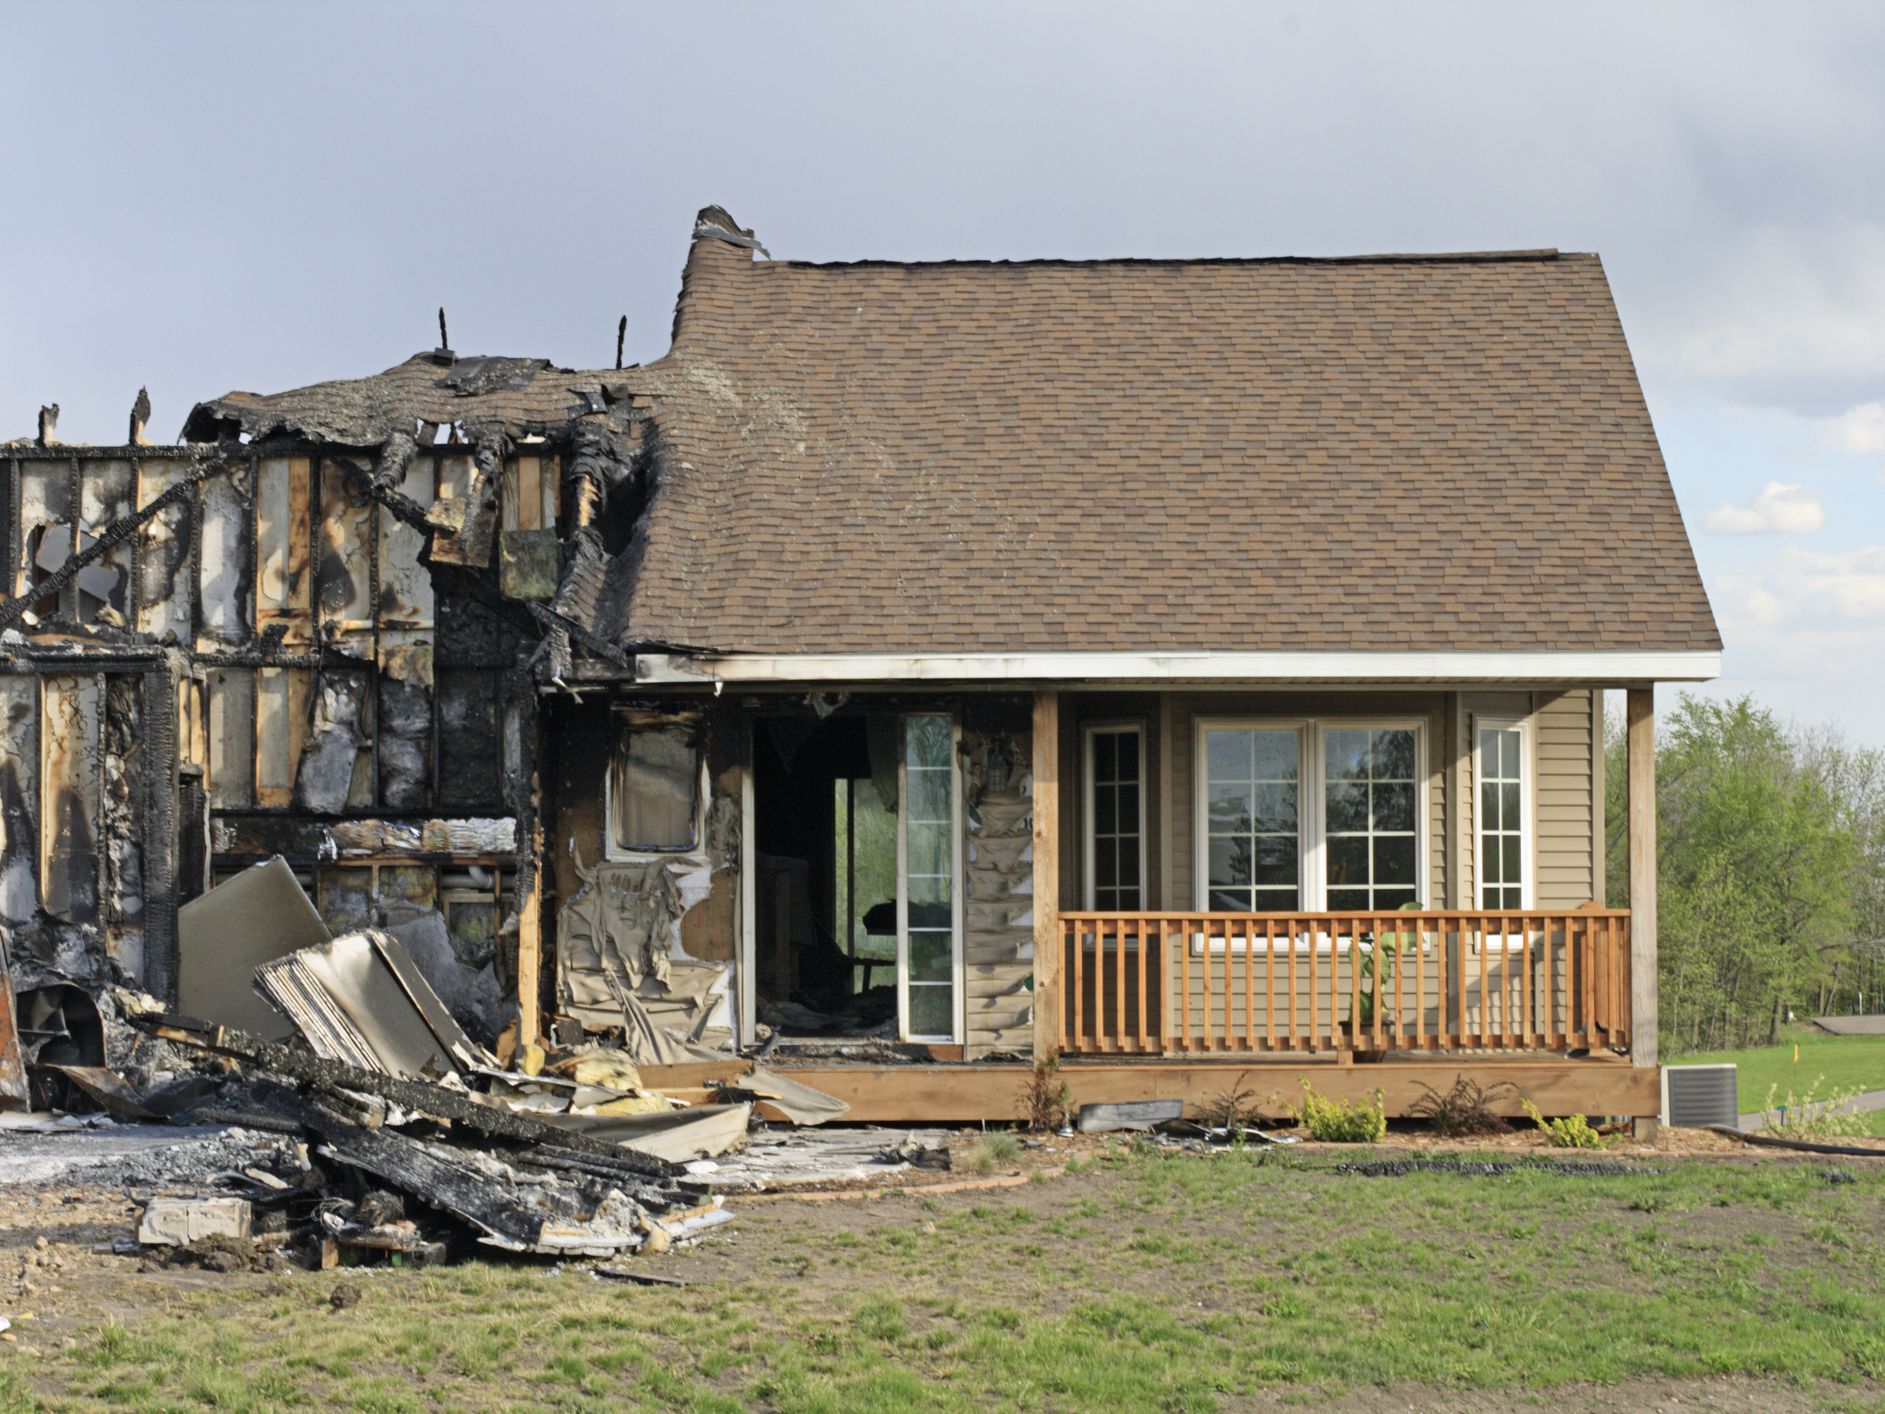 How Can Fire Restoration Agencies Help?